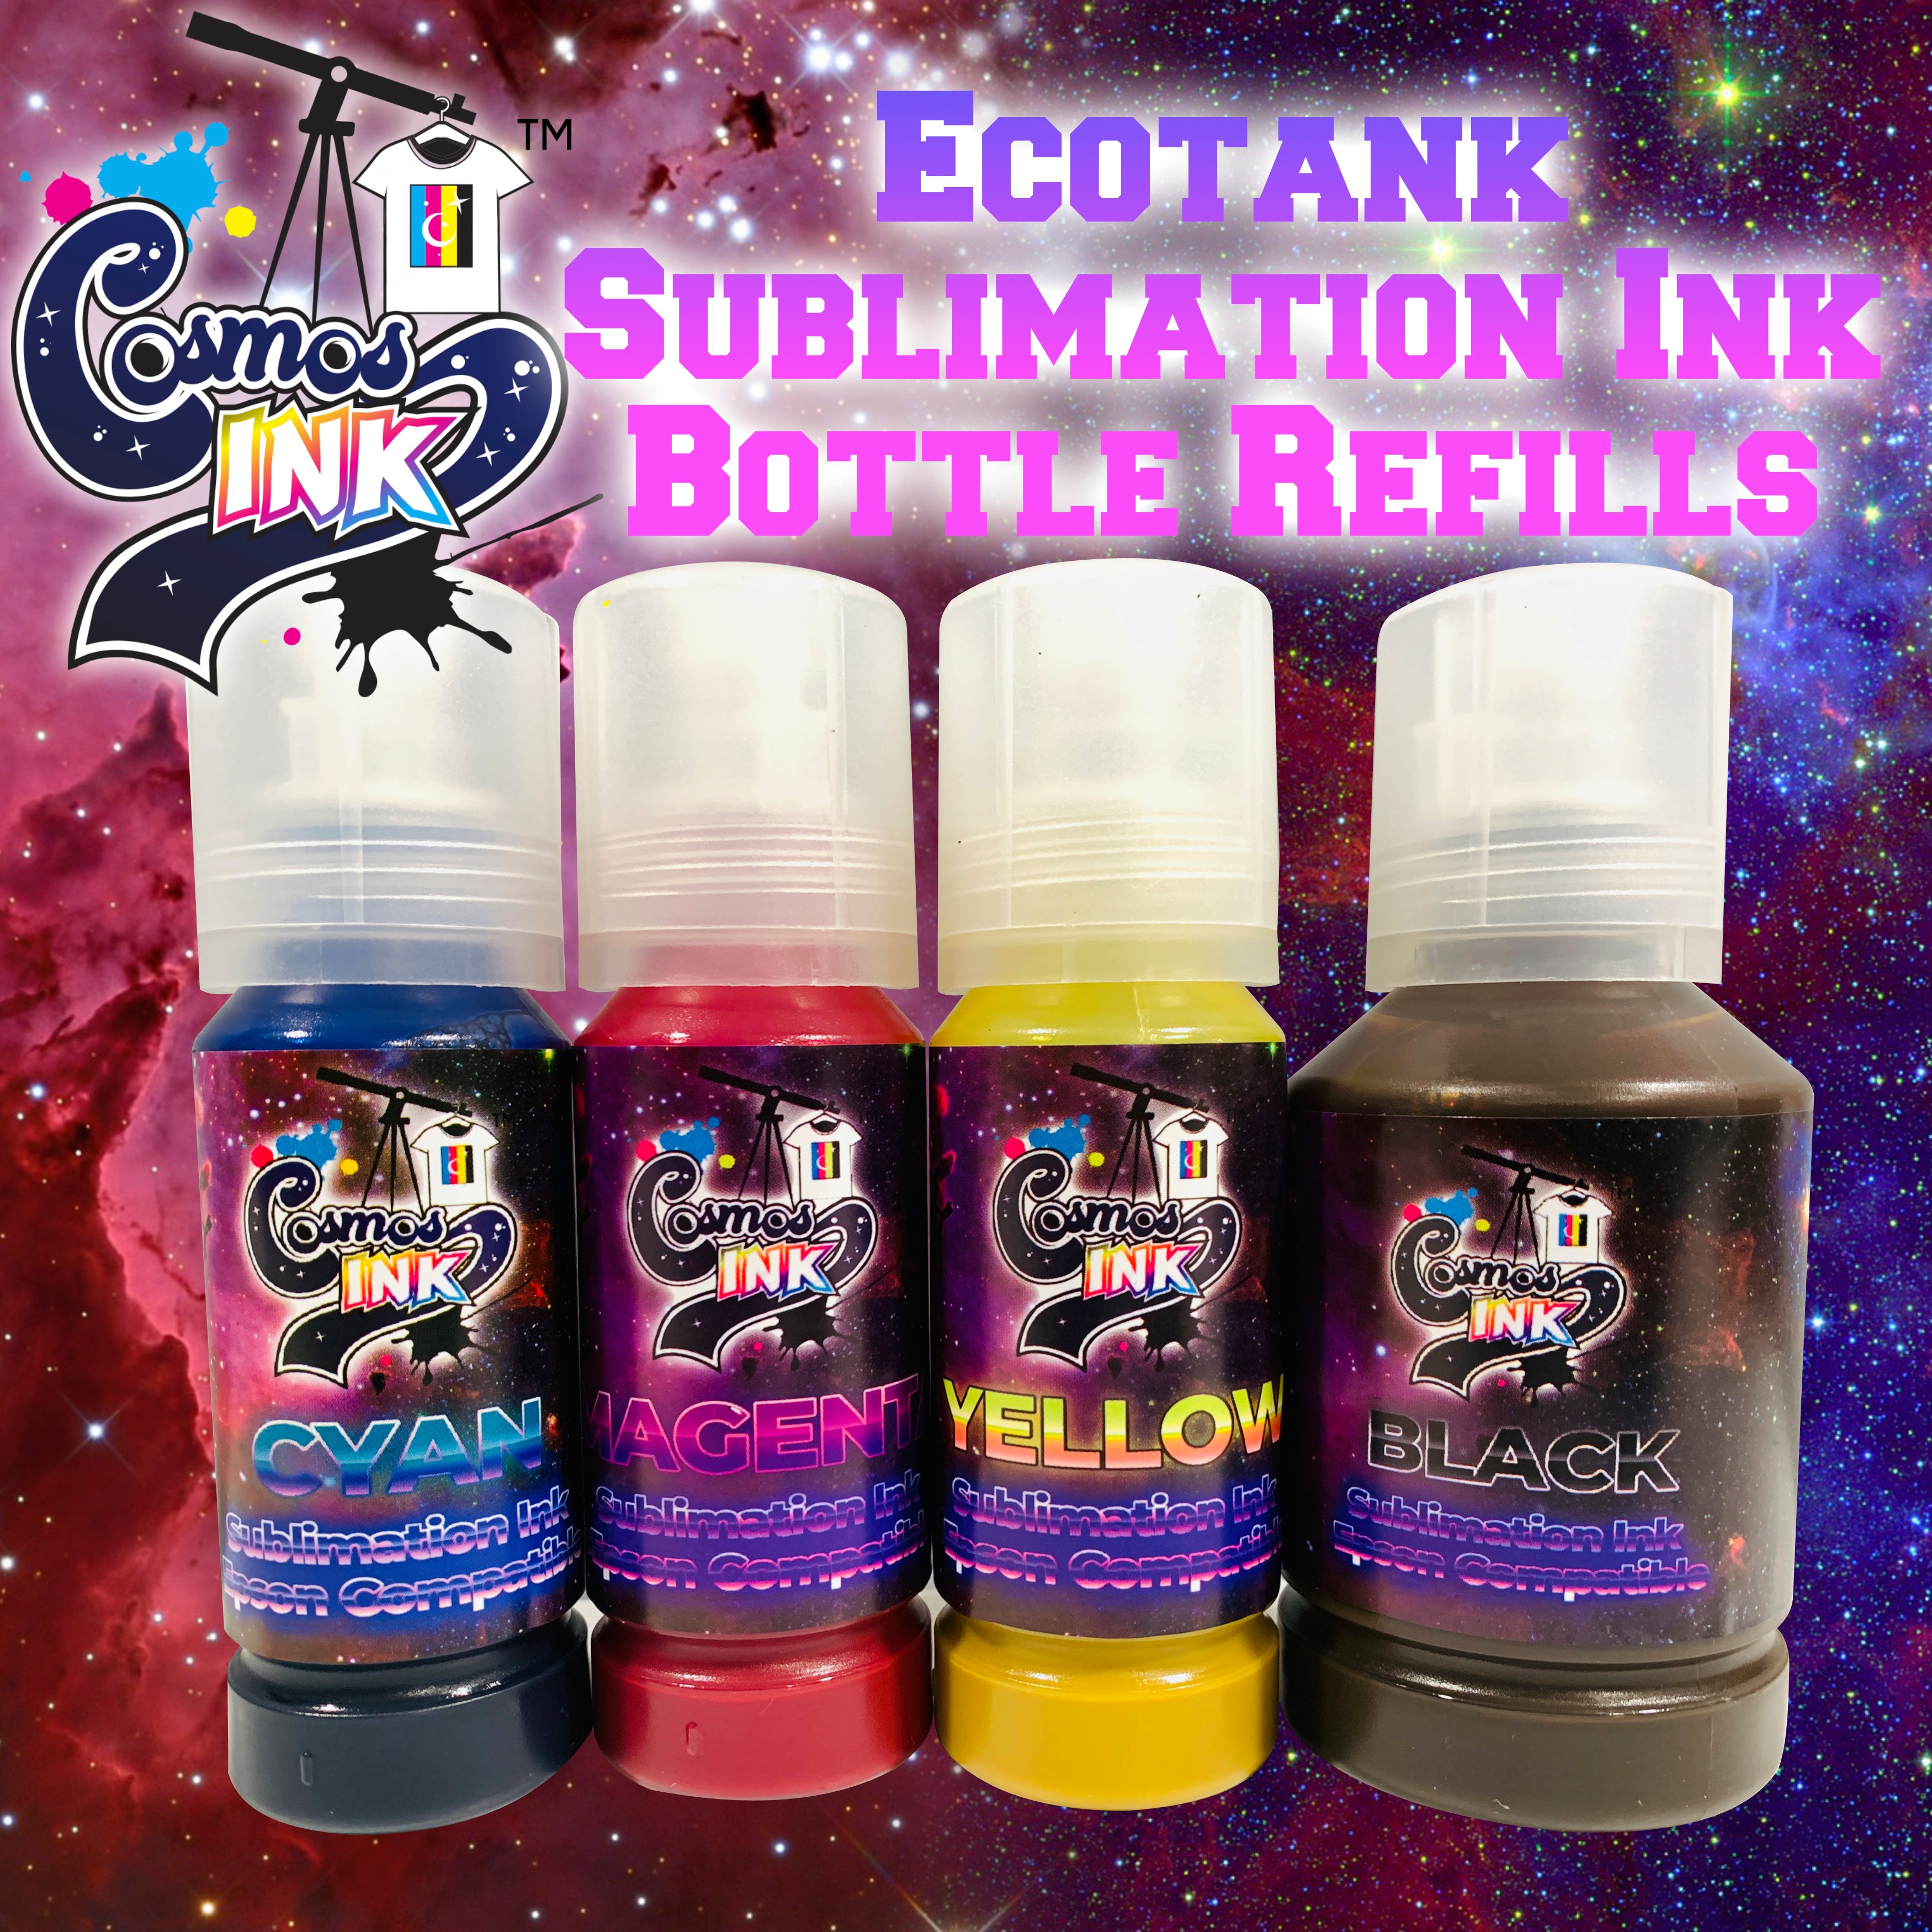 Epson Printer Sublimation Ink Refill